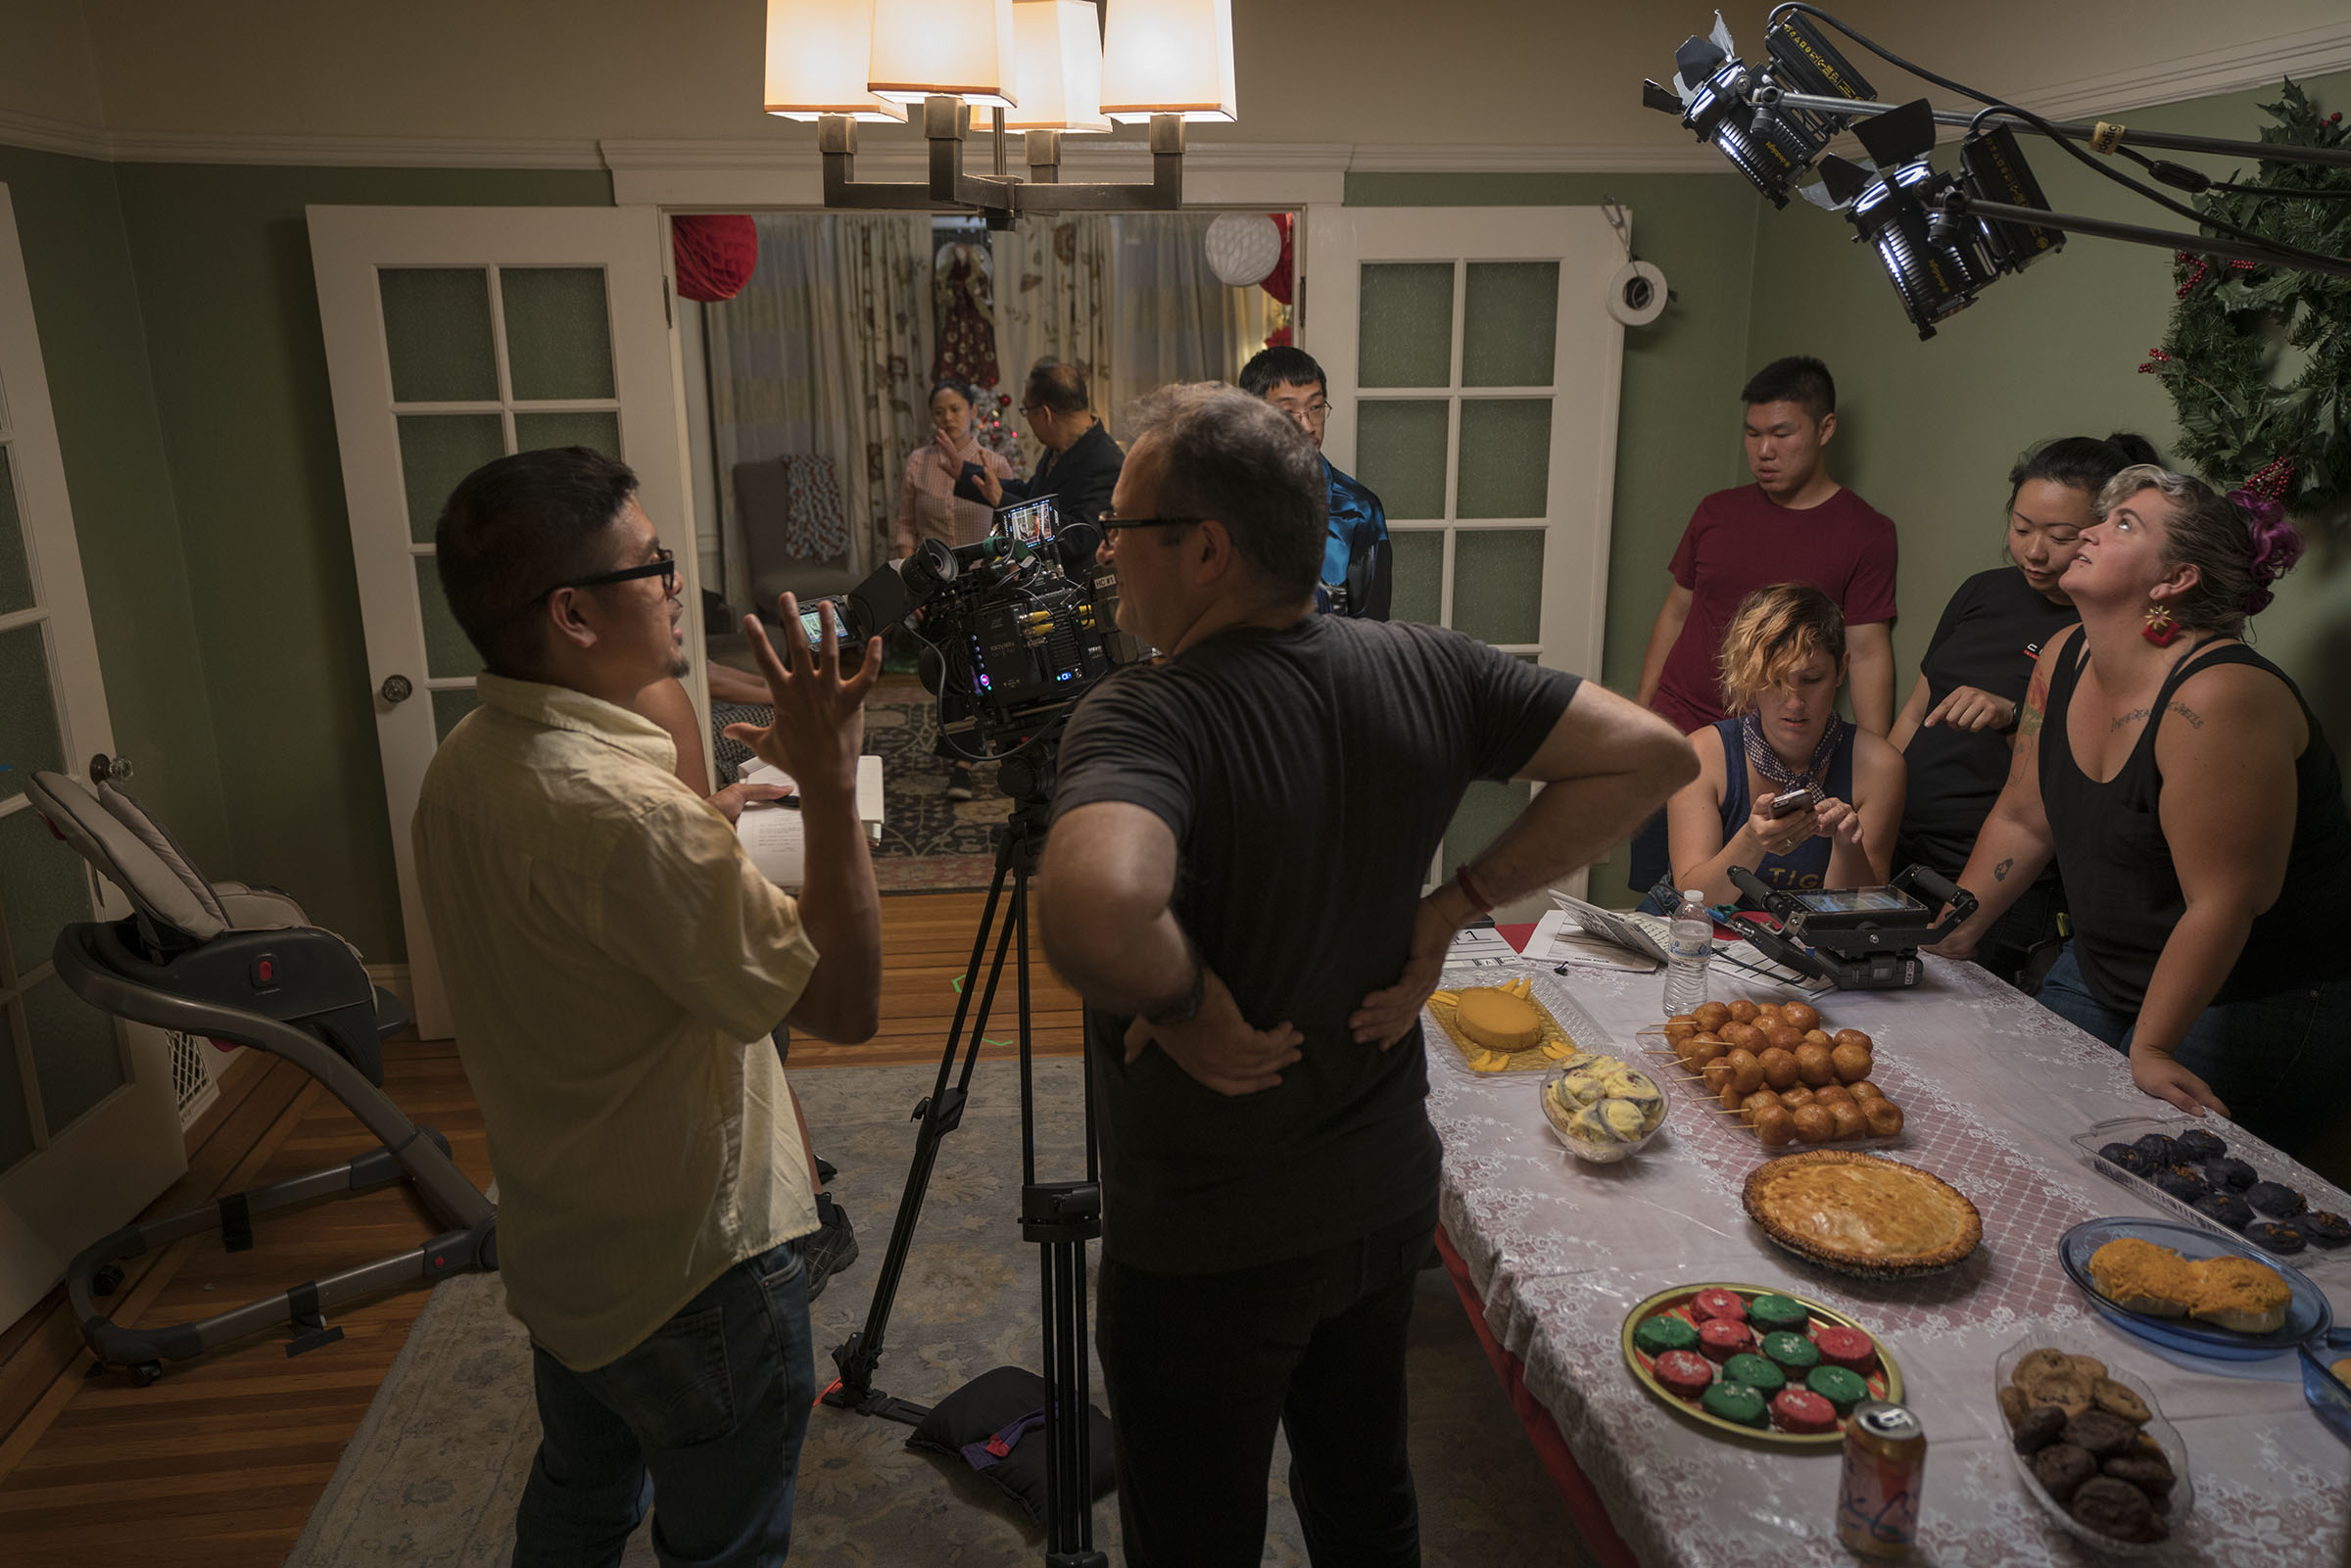  Director H.P. Mendoza (left) with cast and crew on the set of  Bitter Melon.  Photo by Susie Heyden. Courtesy Ersatz Film. 